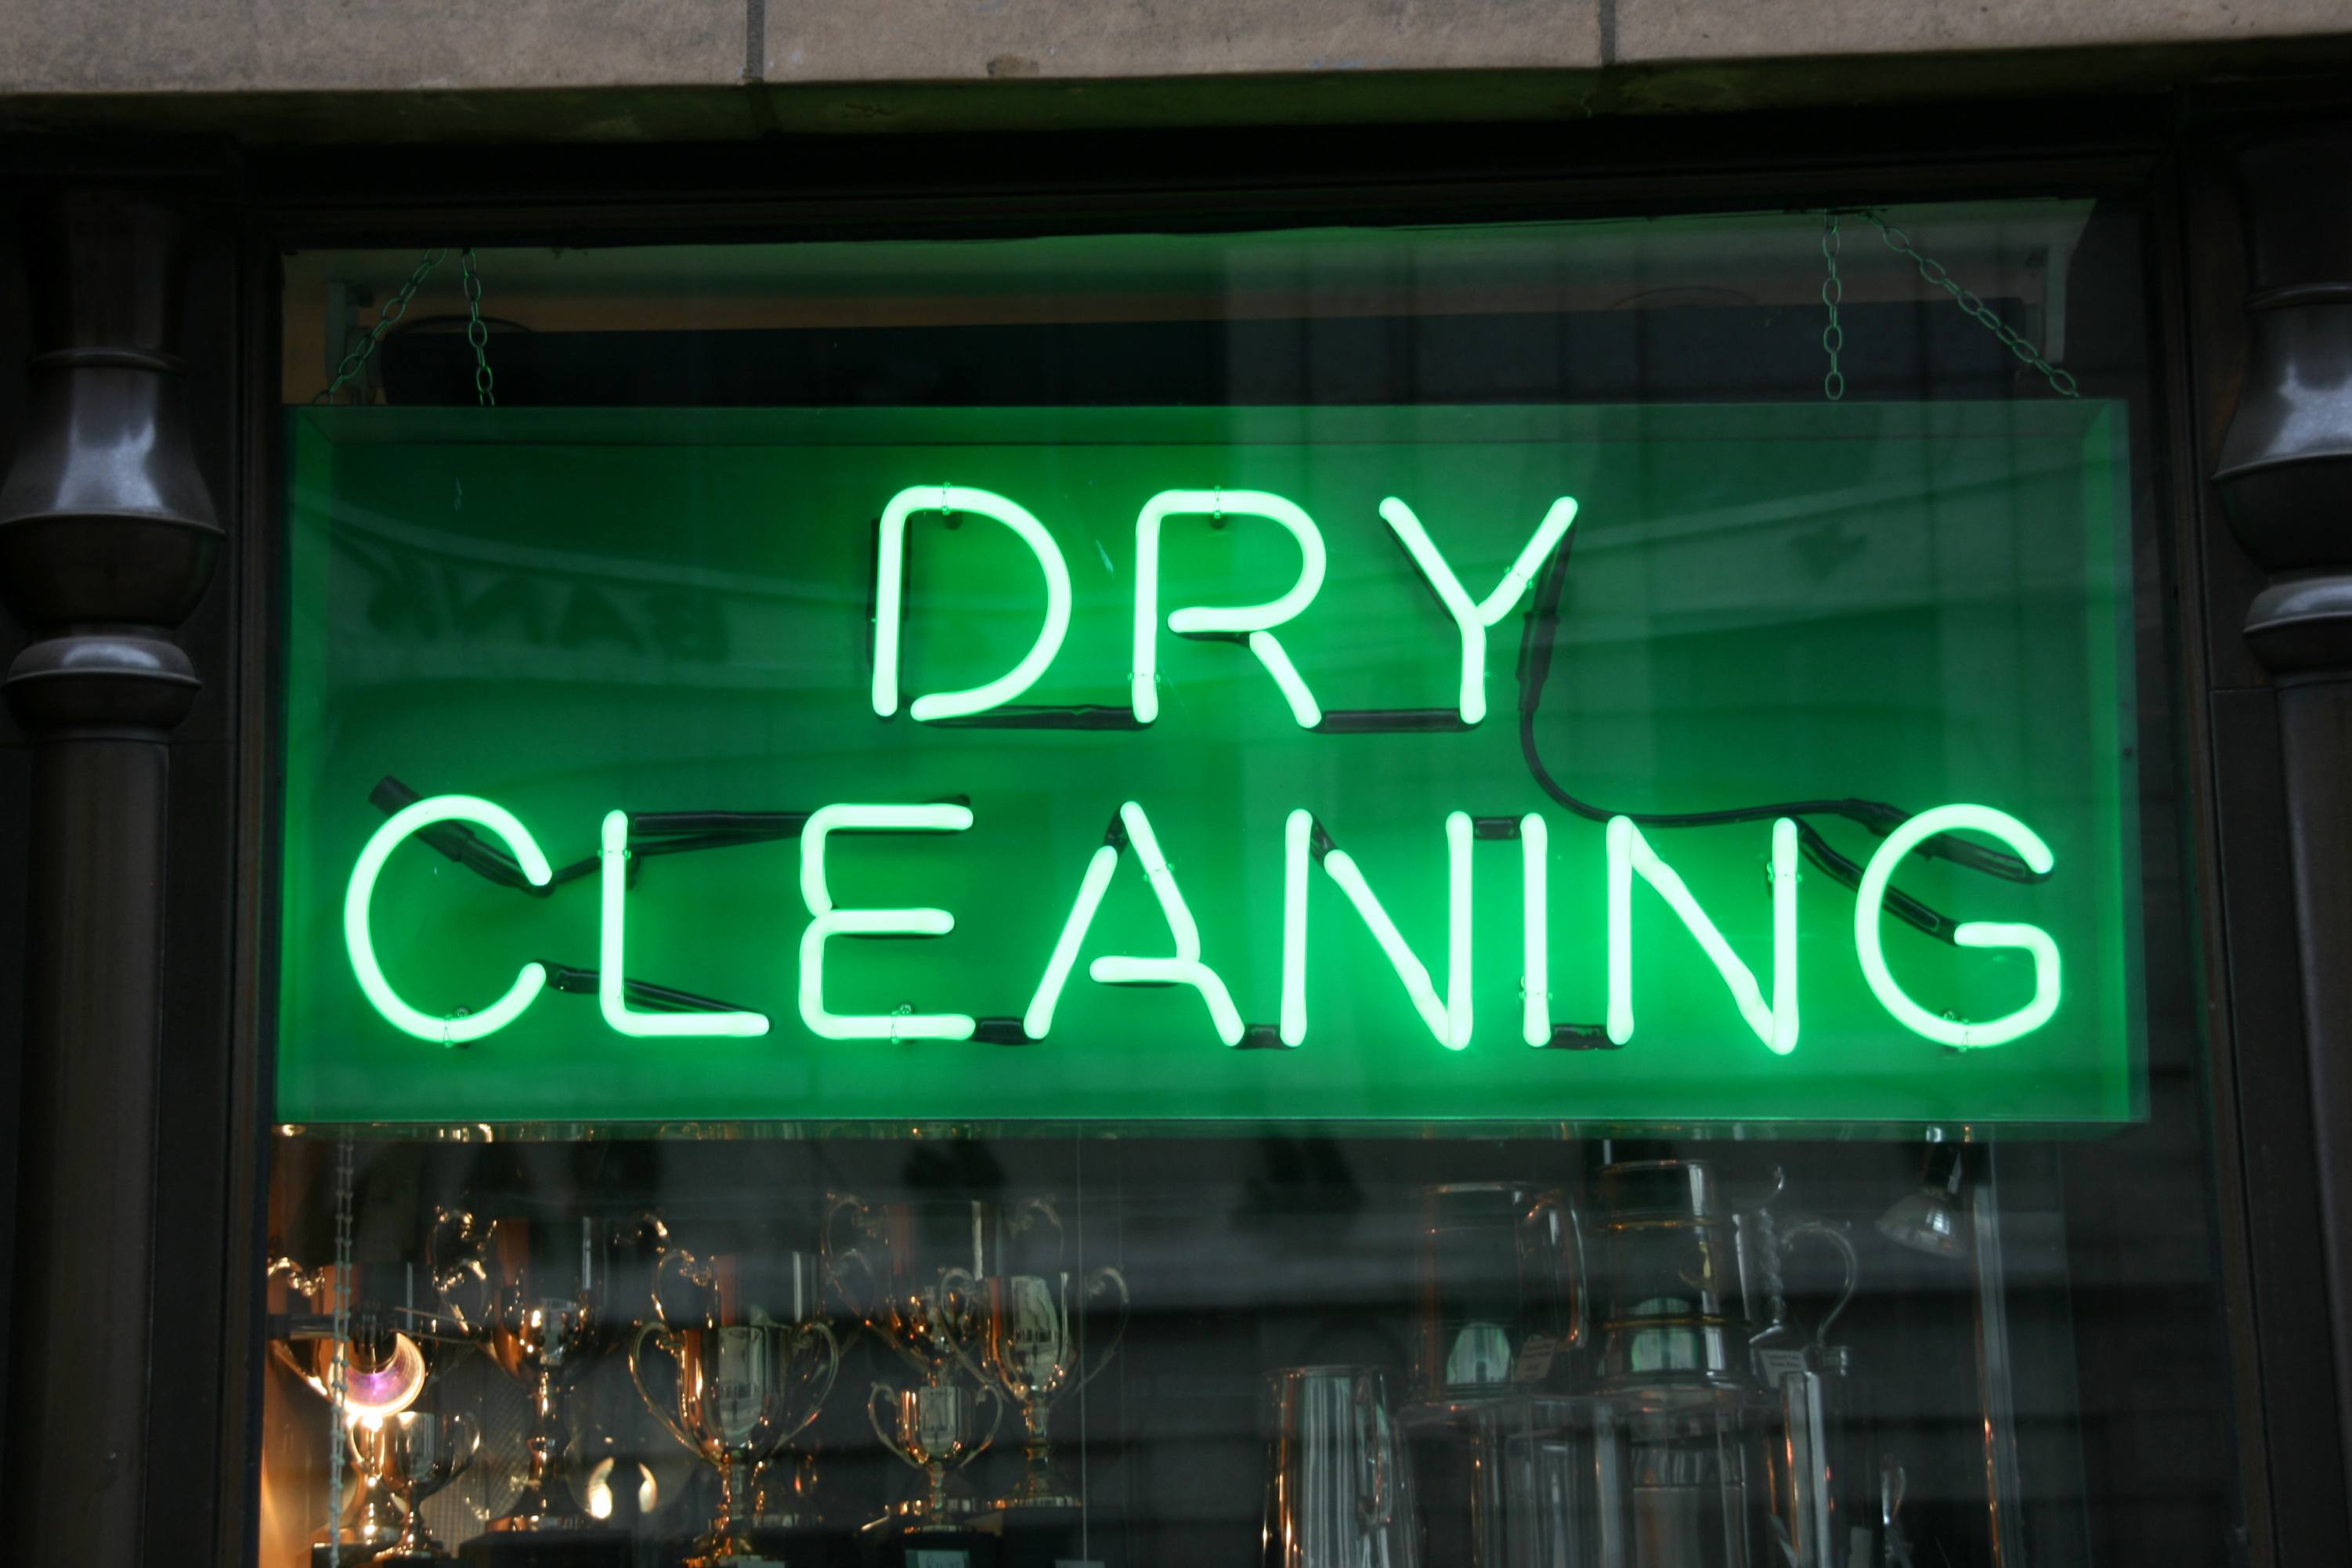 Close-up of a neon green dry cleaning sign in a window